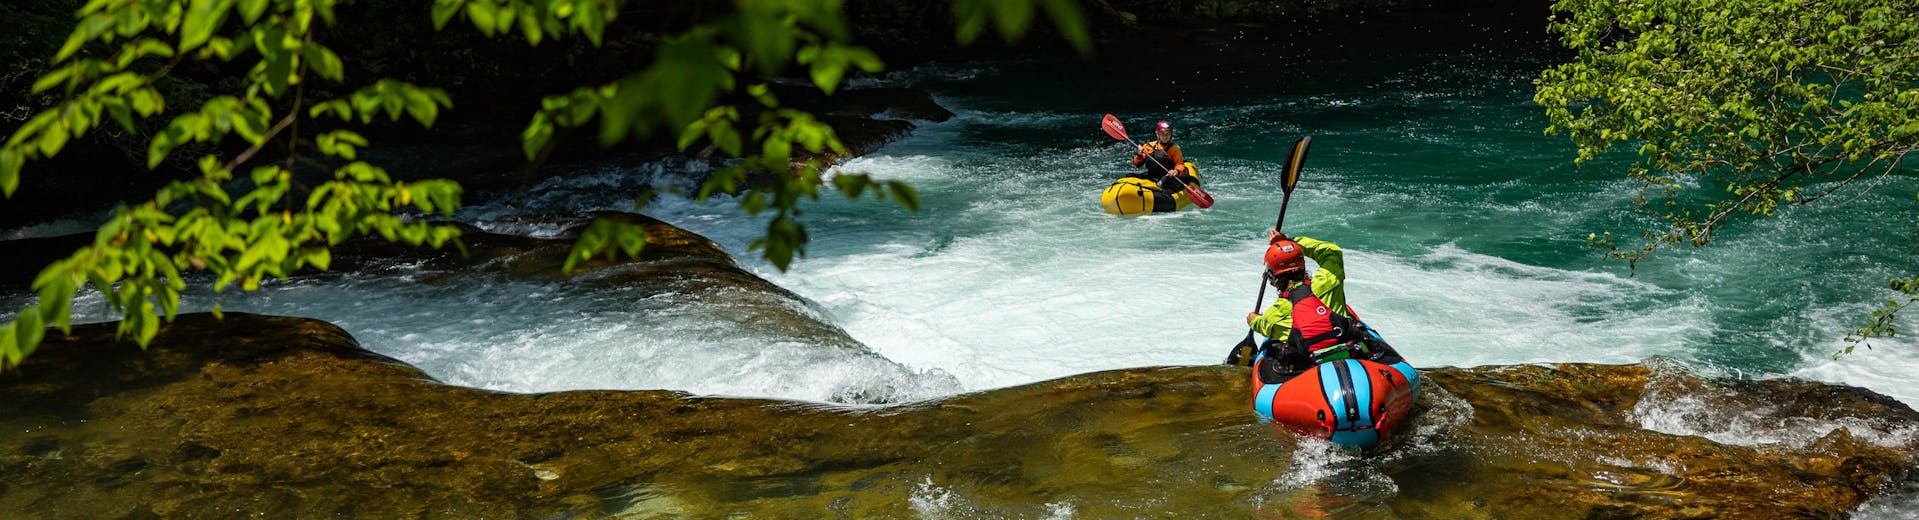 Rafting down a rapid during the packrafting on the Mreznica River hosted by Raftrek Adventure Travel Croatia.